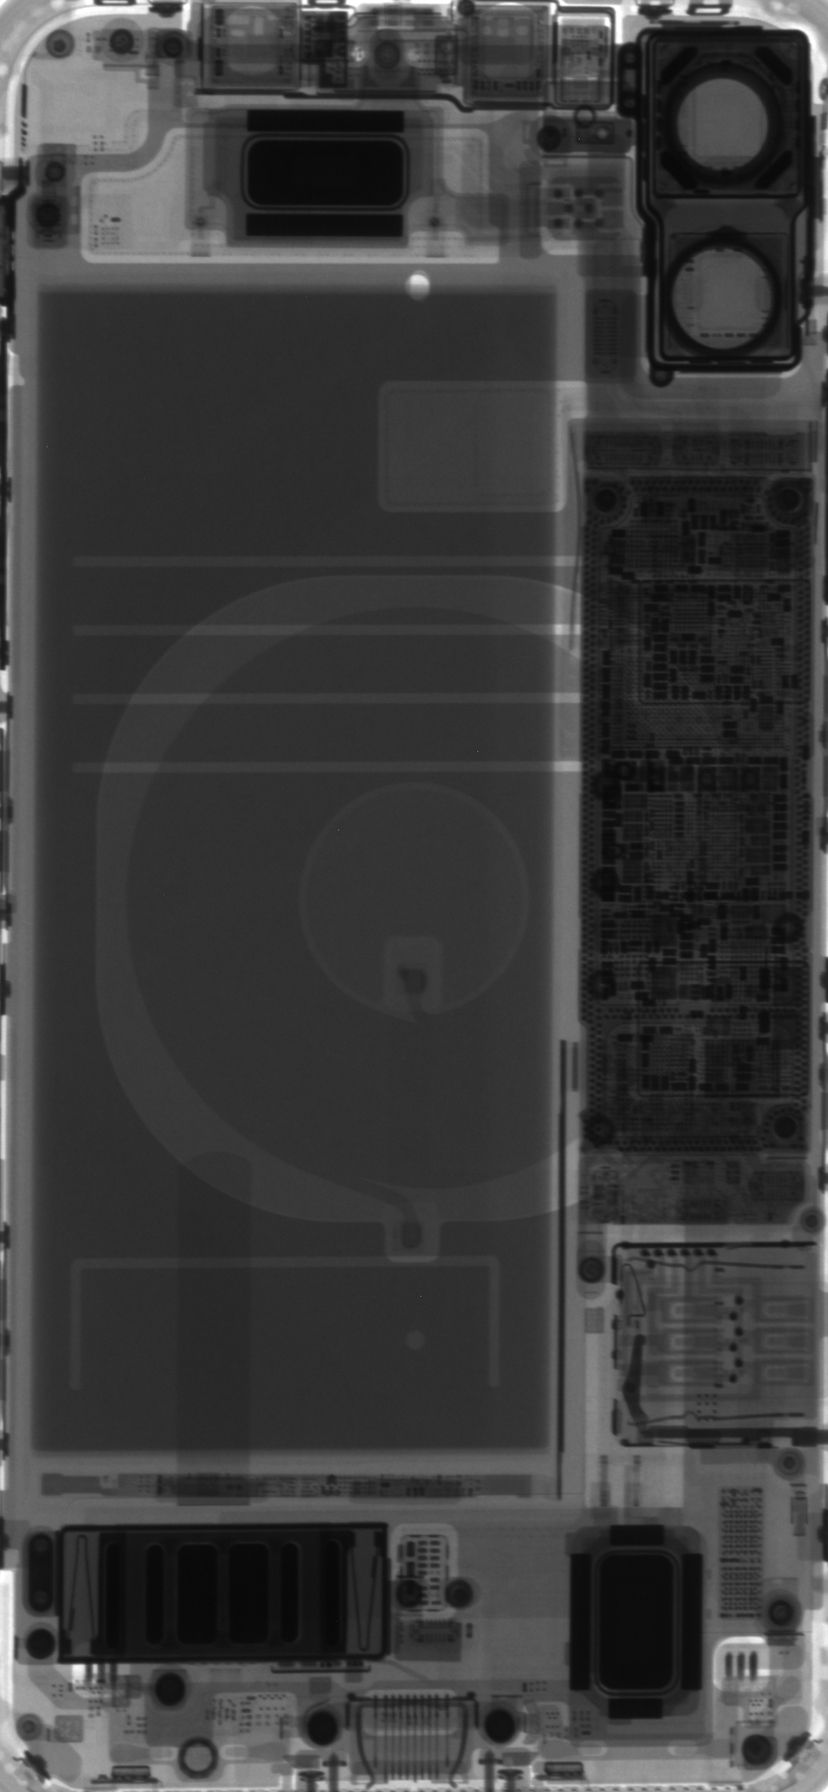 New iFixit wallpaper show iPhone 11 inside